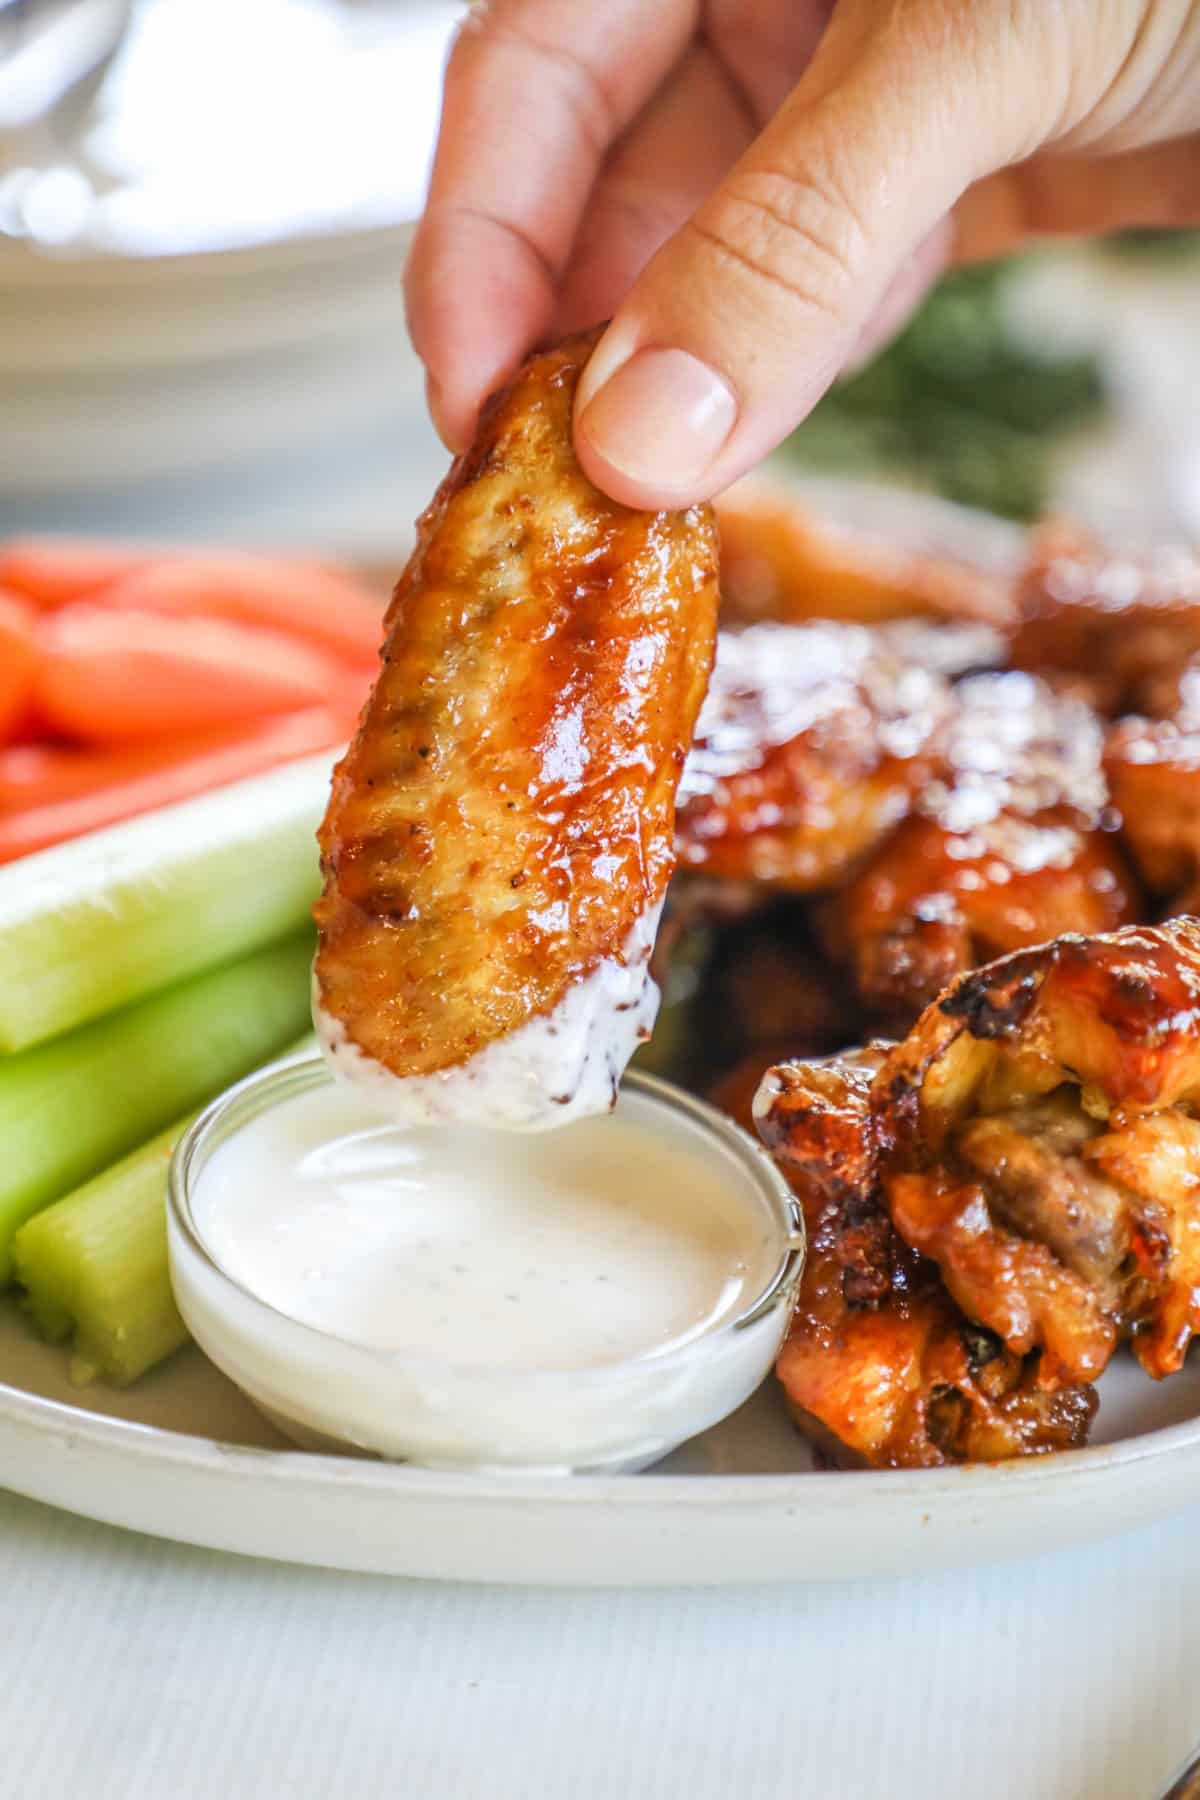 Chicken wings being dipped into ranch